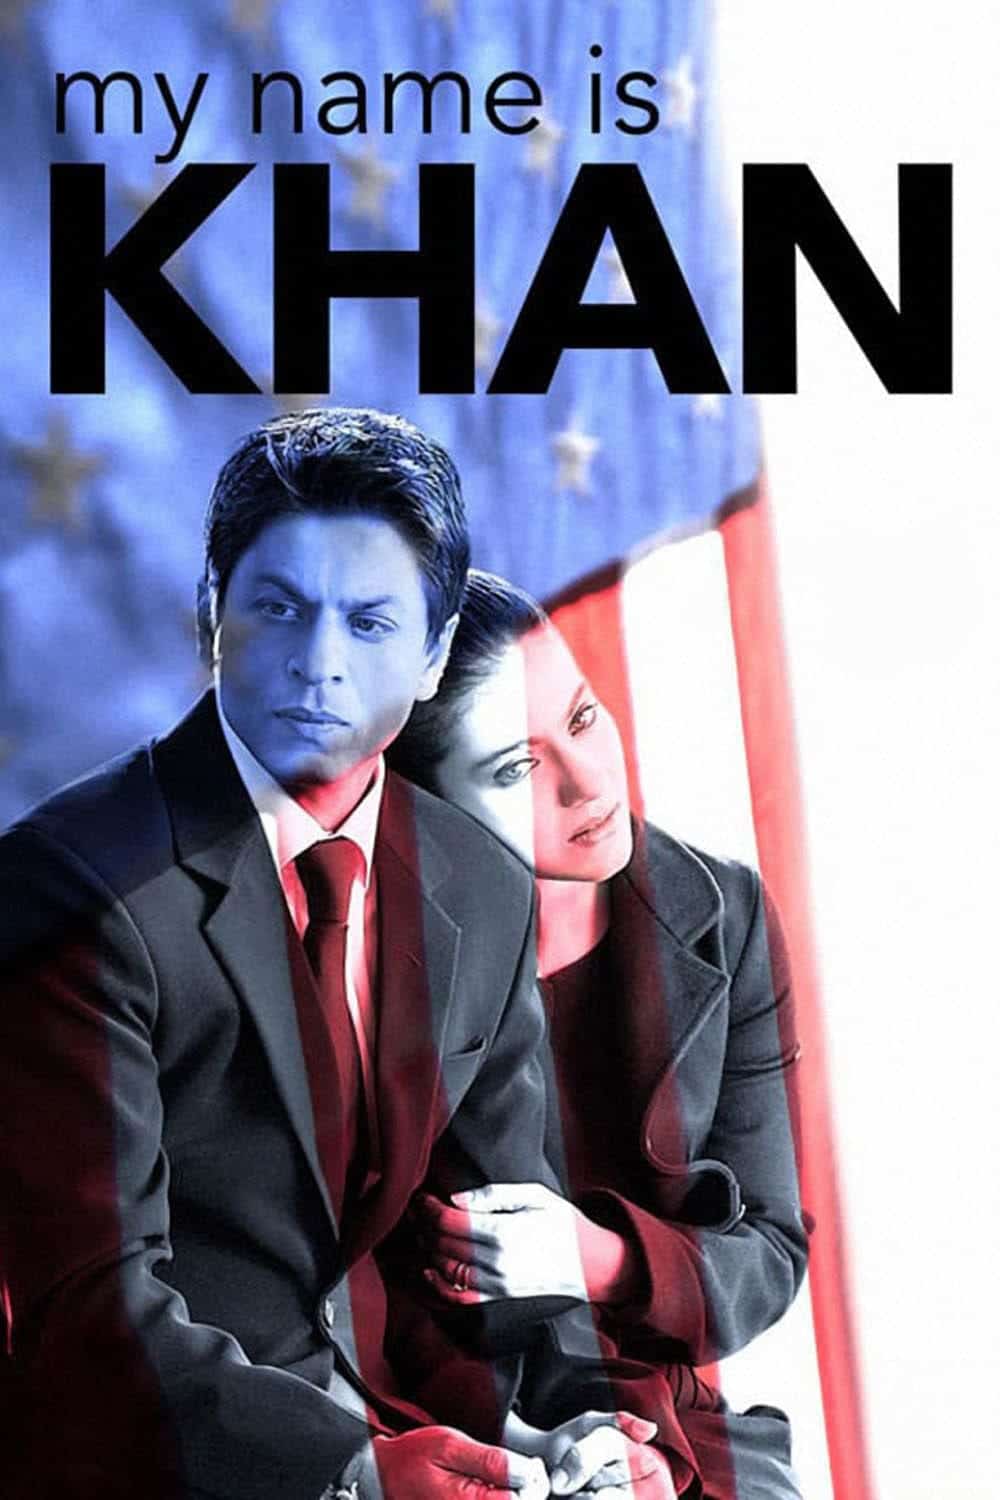 Poster for the movie "My Name Is Khan"